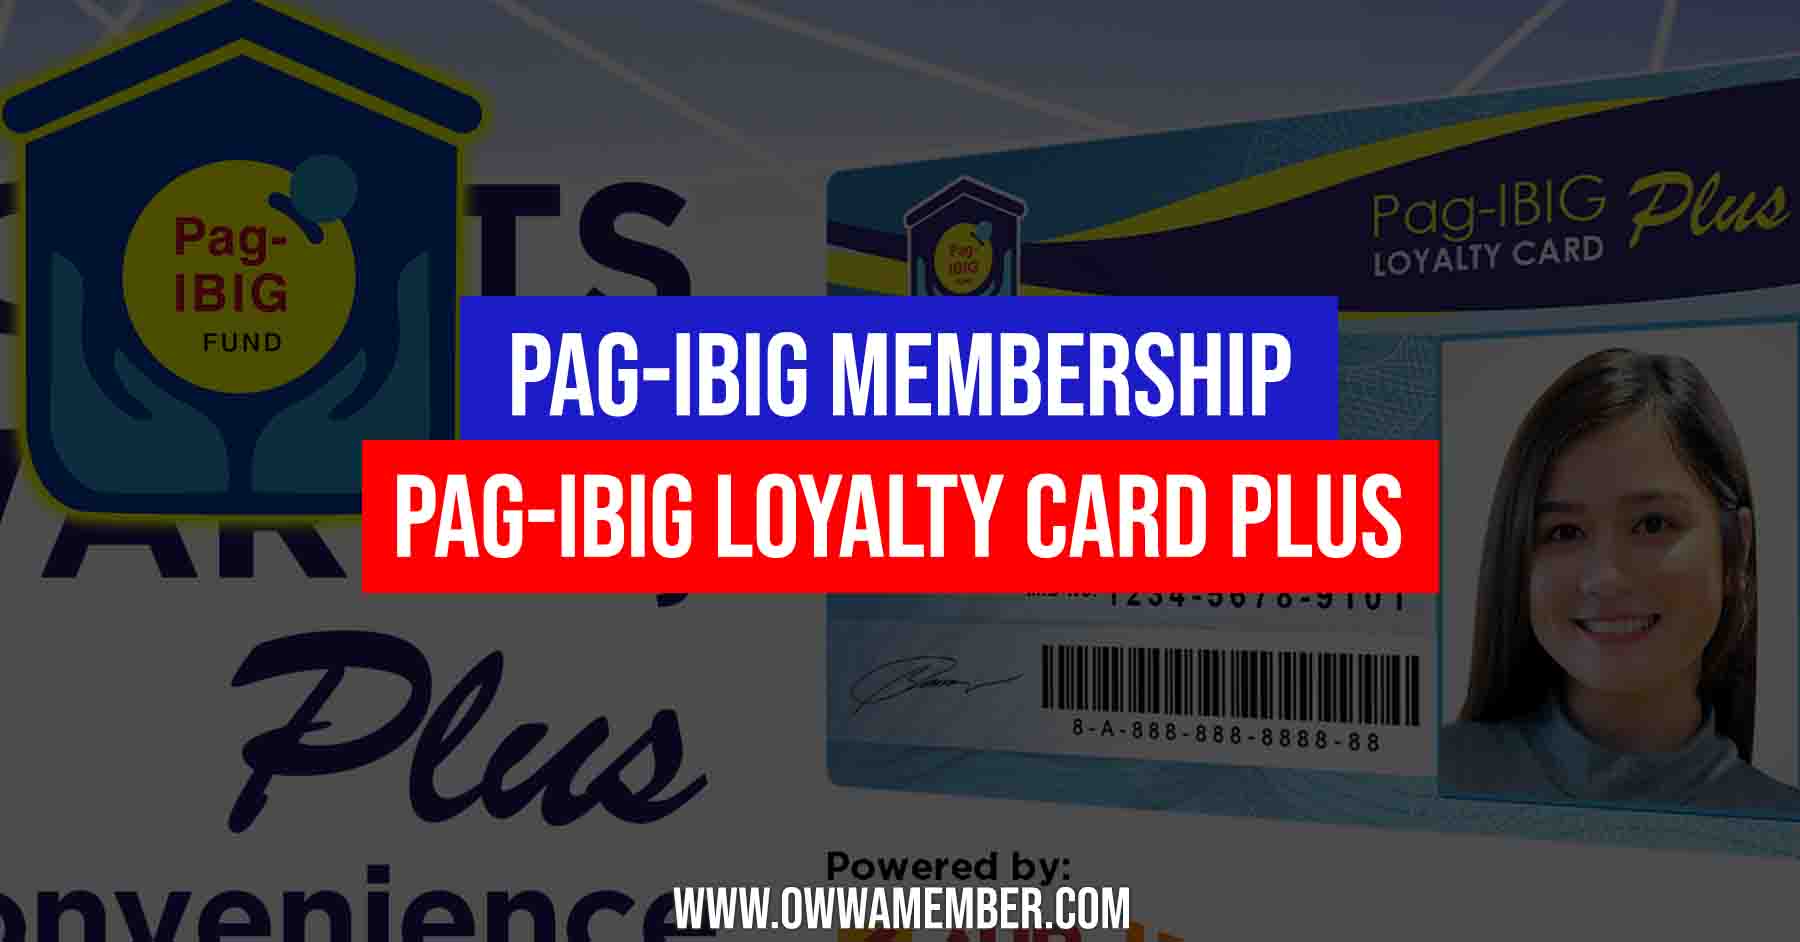 how to apply pag-ibig loyalty card plus